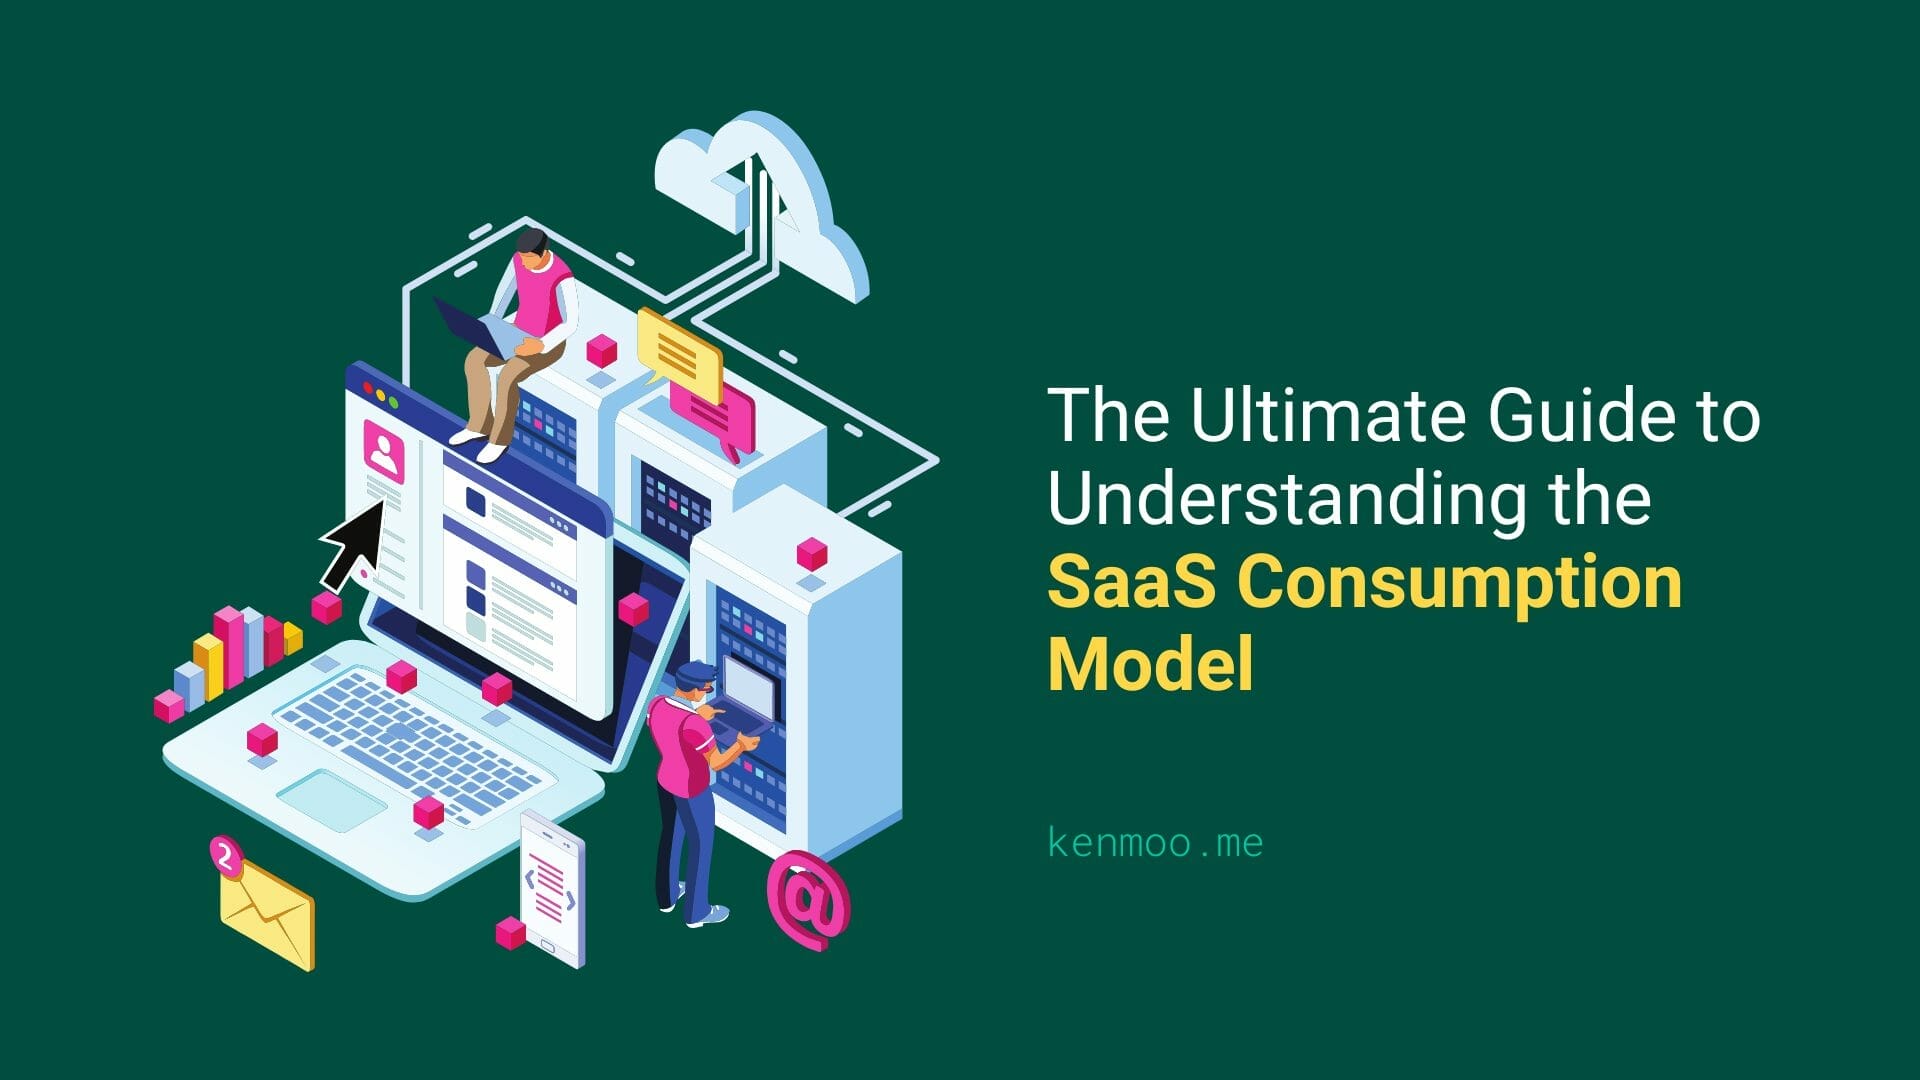 The Ultimate Guide to Understanding the SaaS Consumption Model